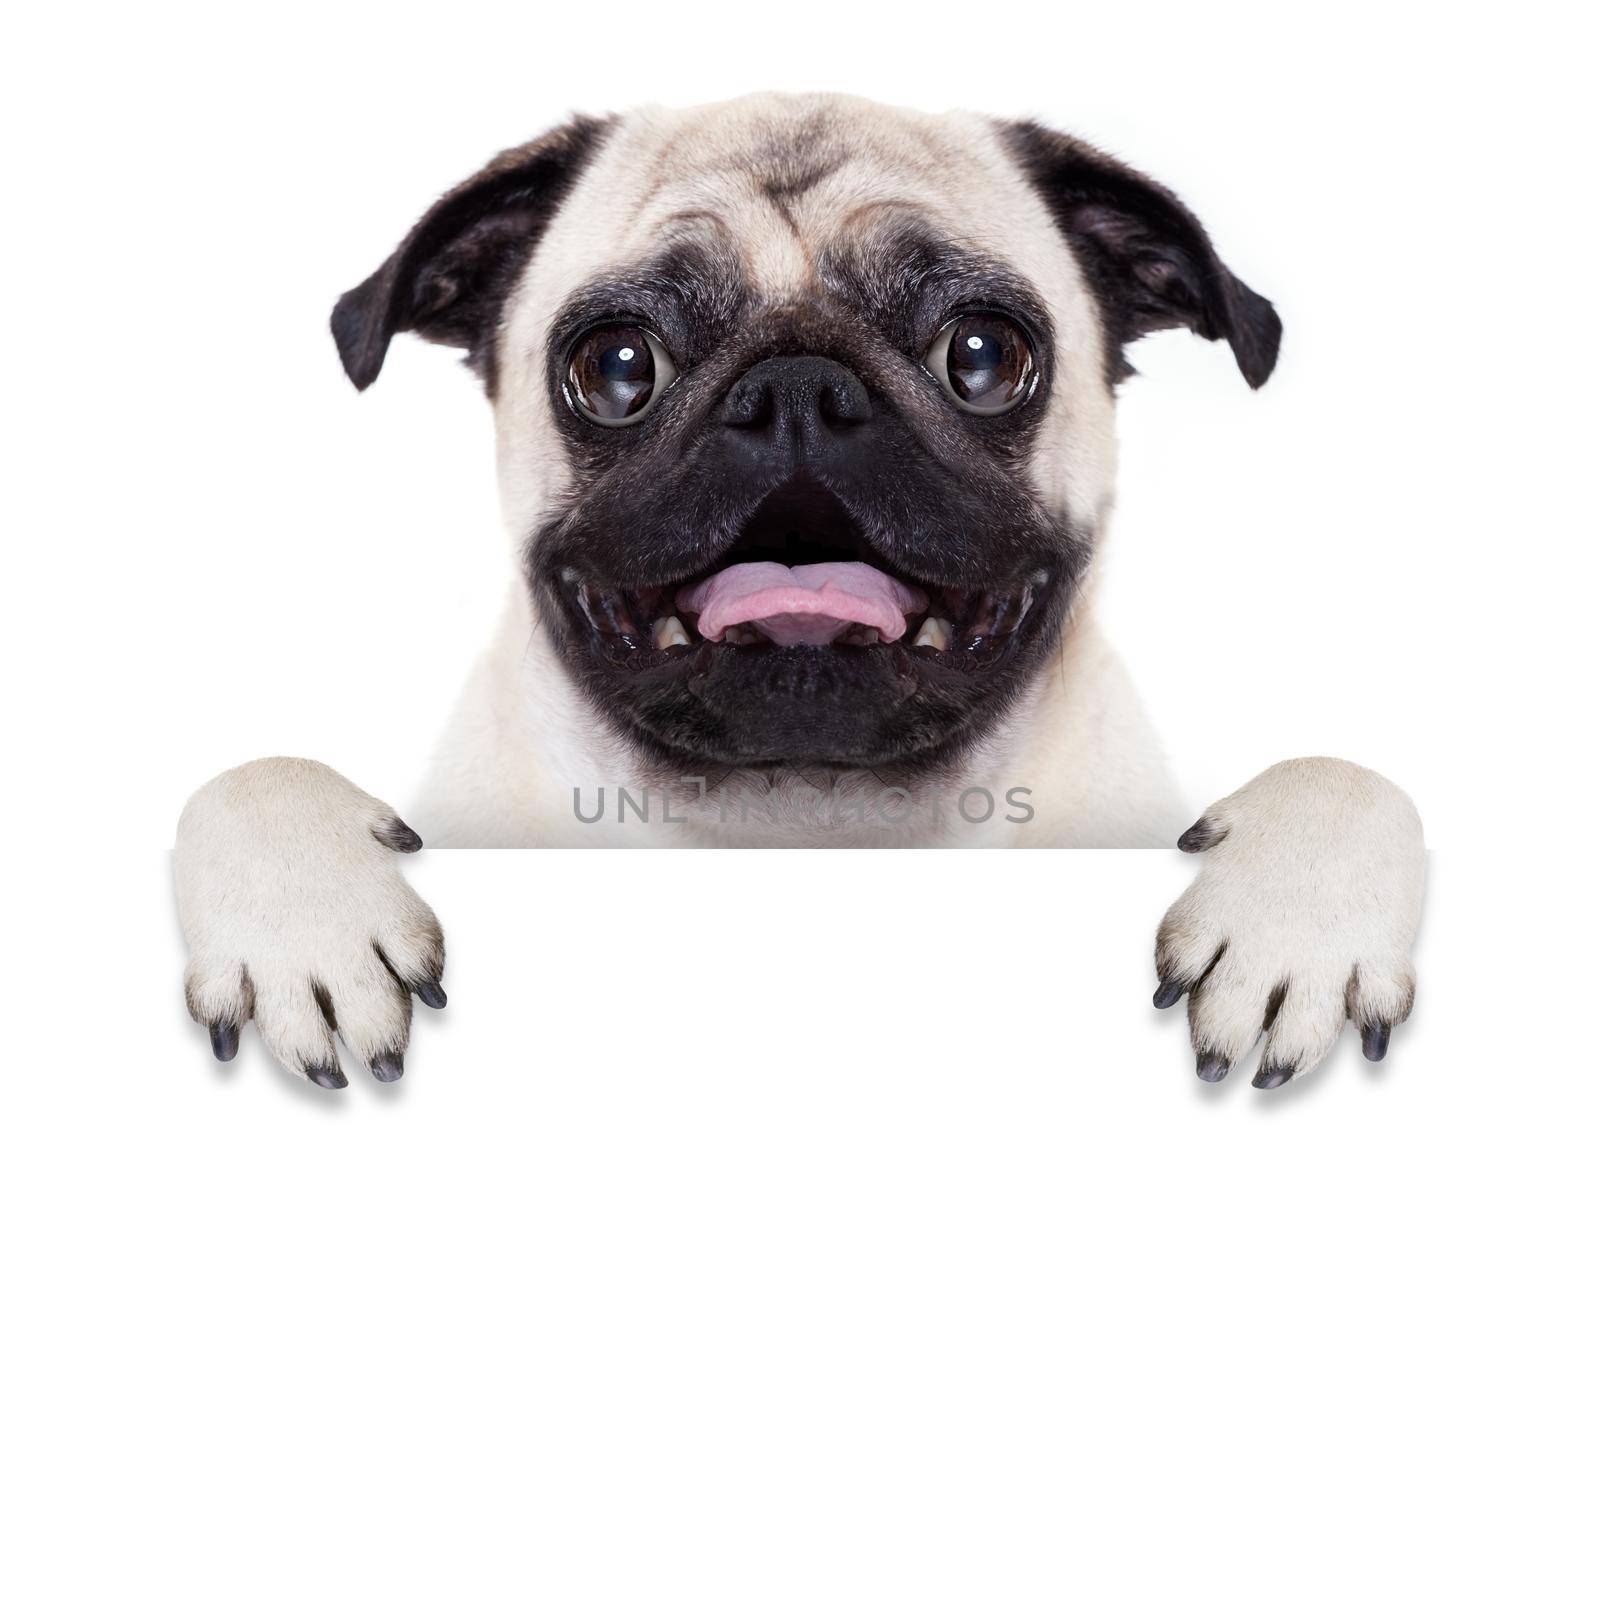 pug dog behind blank white banner or placard with open mouth , surprised